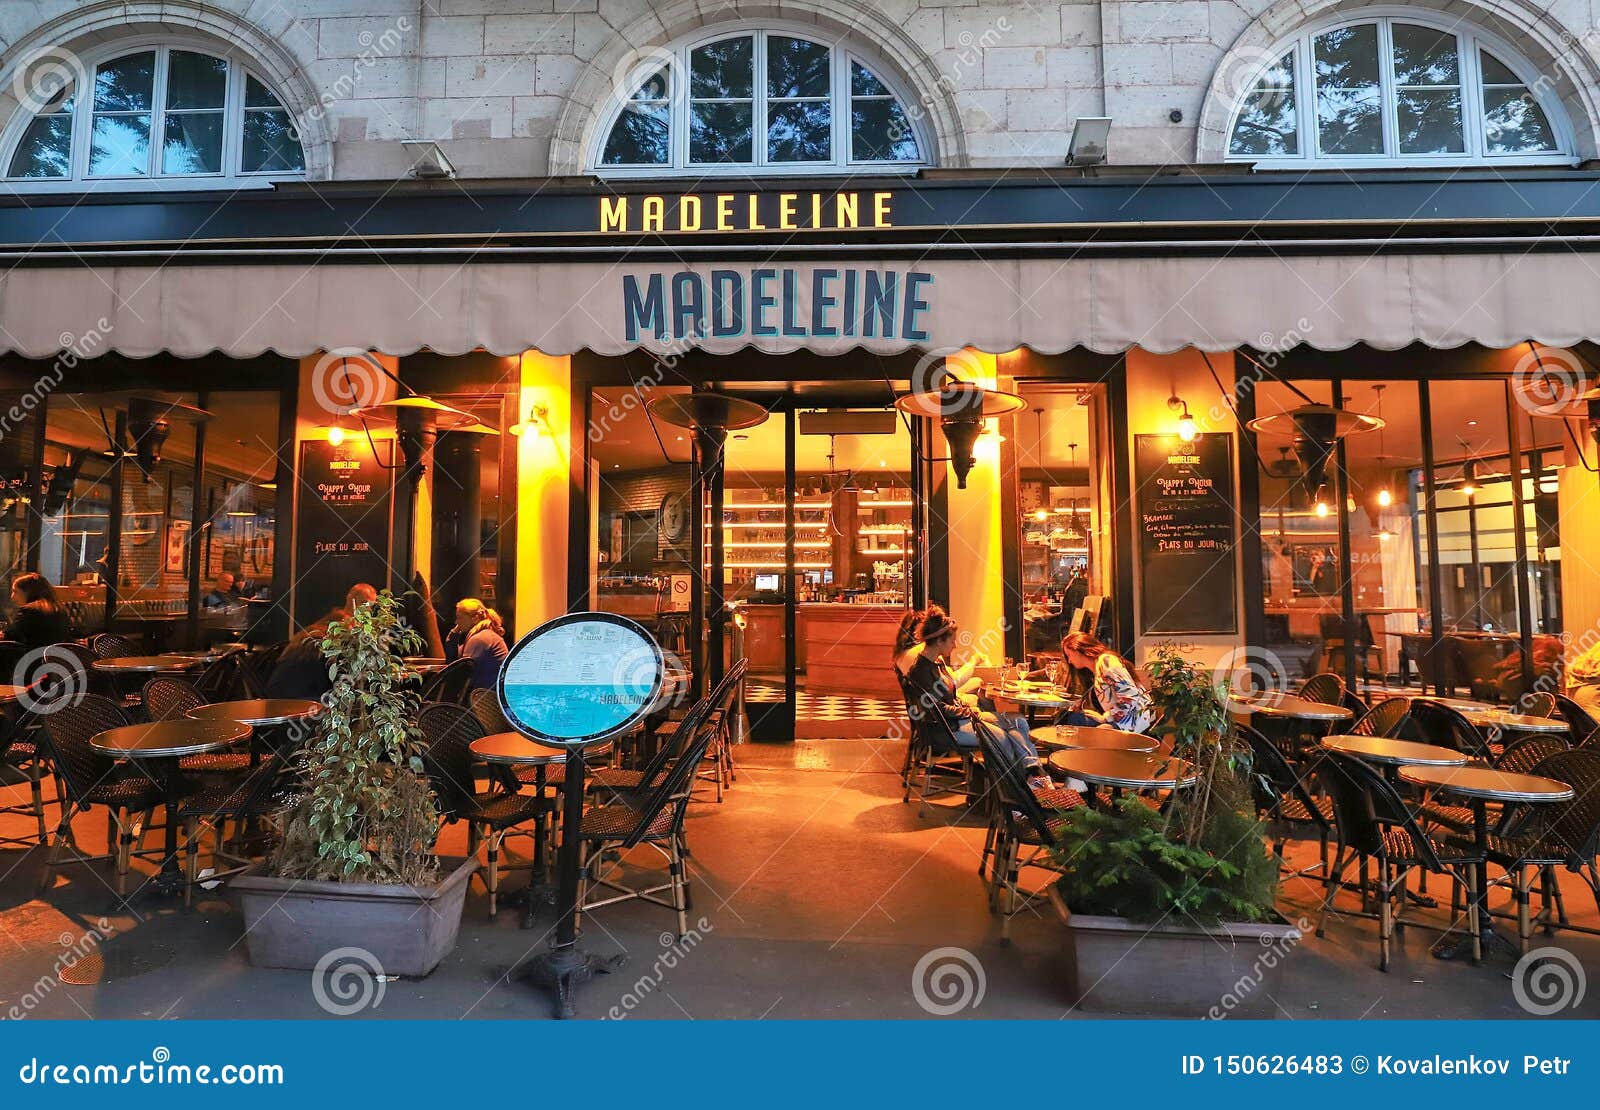 Madeleine Is Traditional French Cafe Located At Boulevard ...